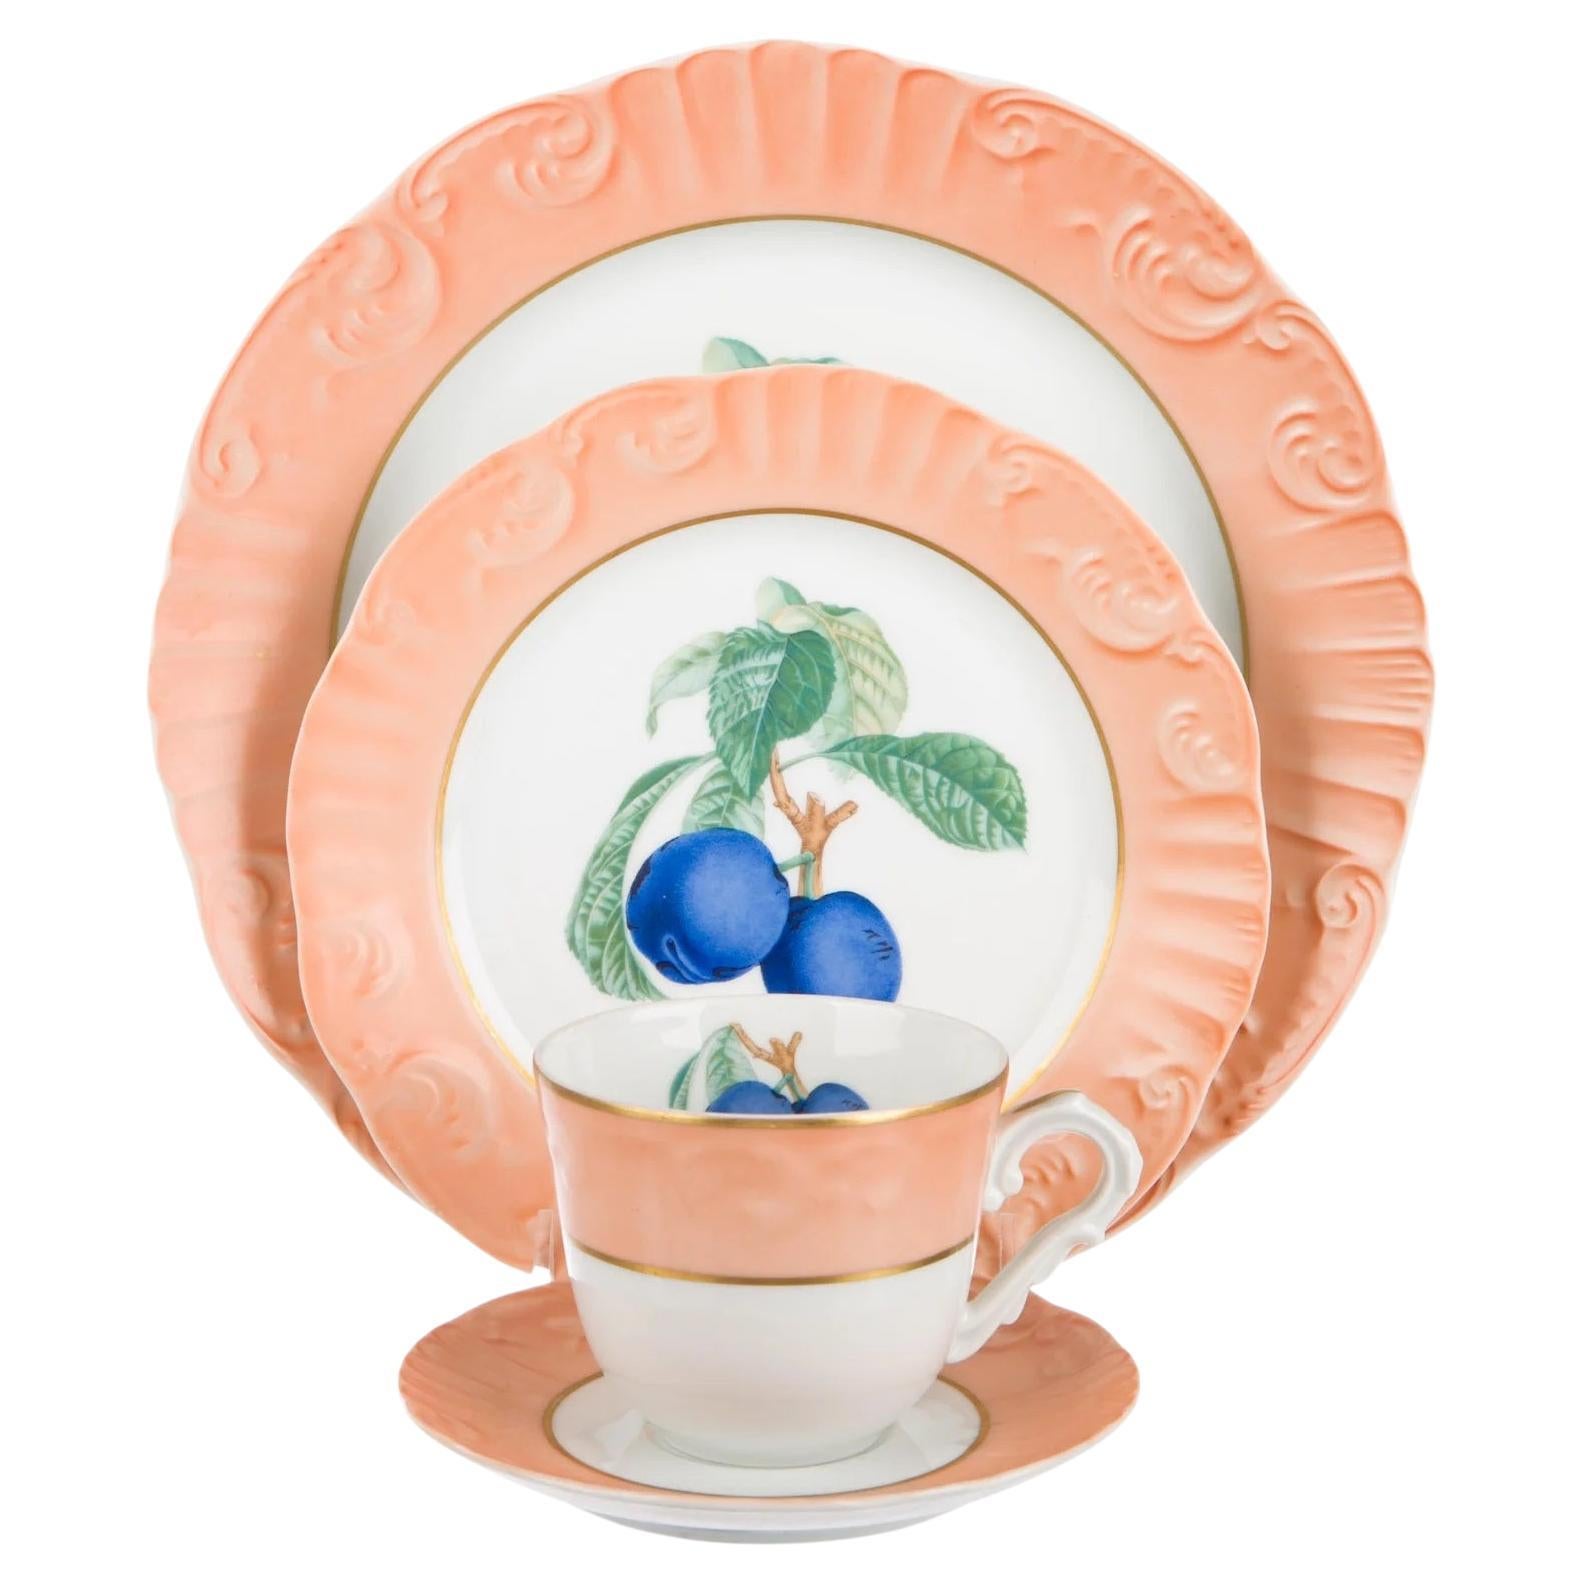 A 24 piece dinnerware set in the Summer Fruit pattern by Mottahedeh. 

Features a peach and white multicolor design with fruit motif at centers, scalloped edges at plates, gilt accents and brand stamp at undersides. 

Includes the following 24